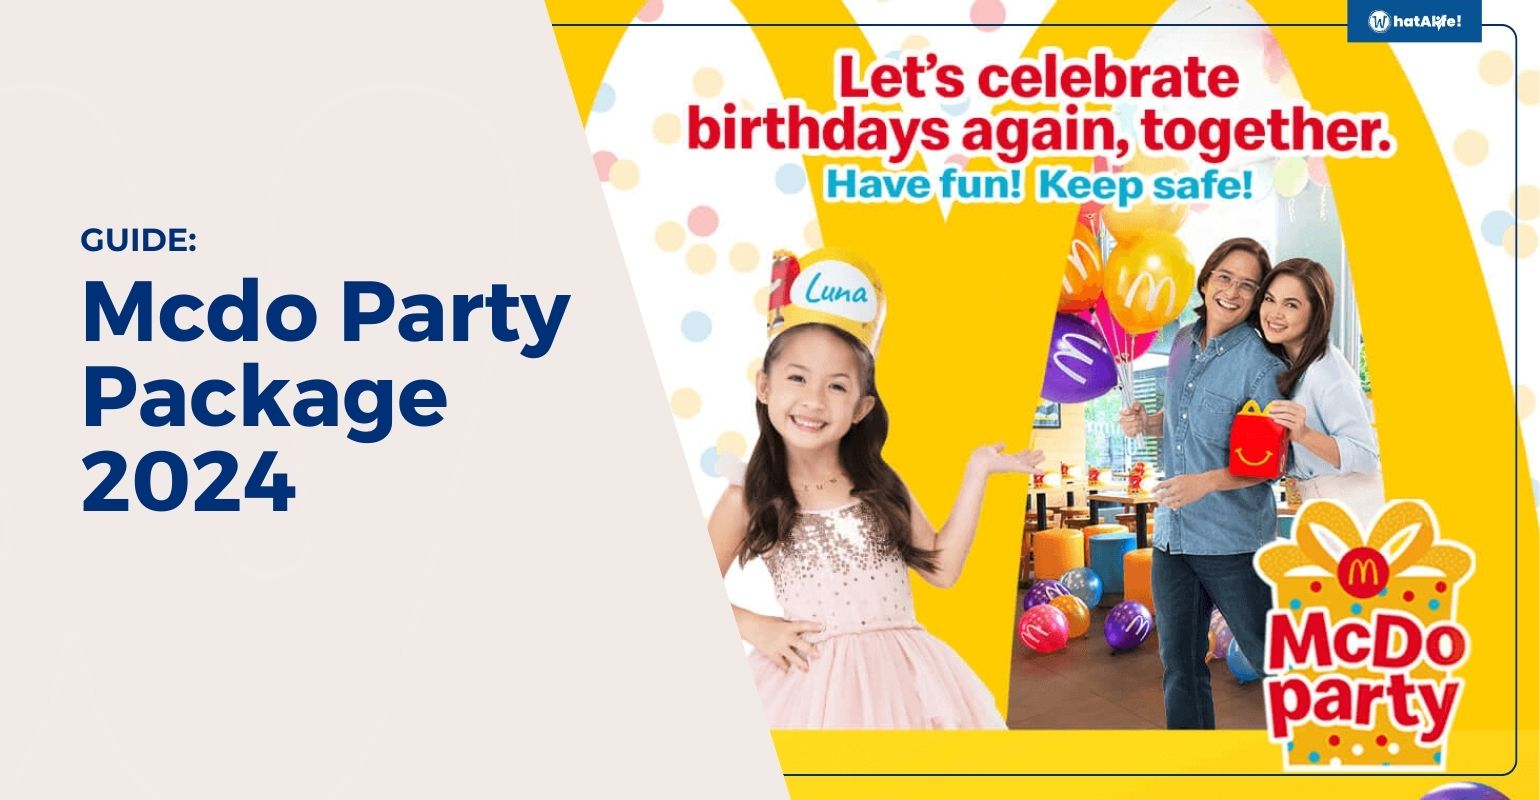 guide mcdo party package 2024